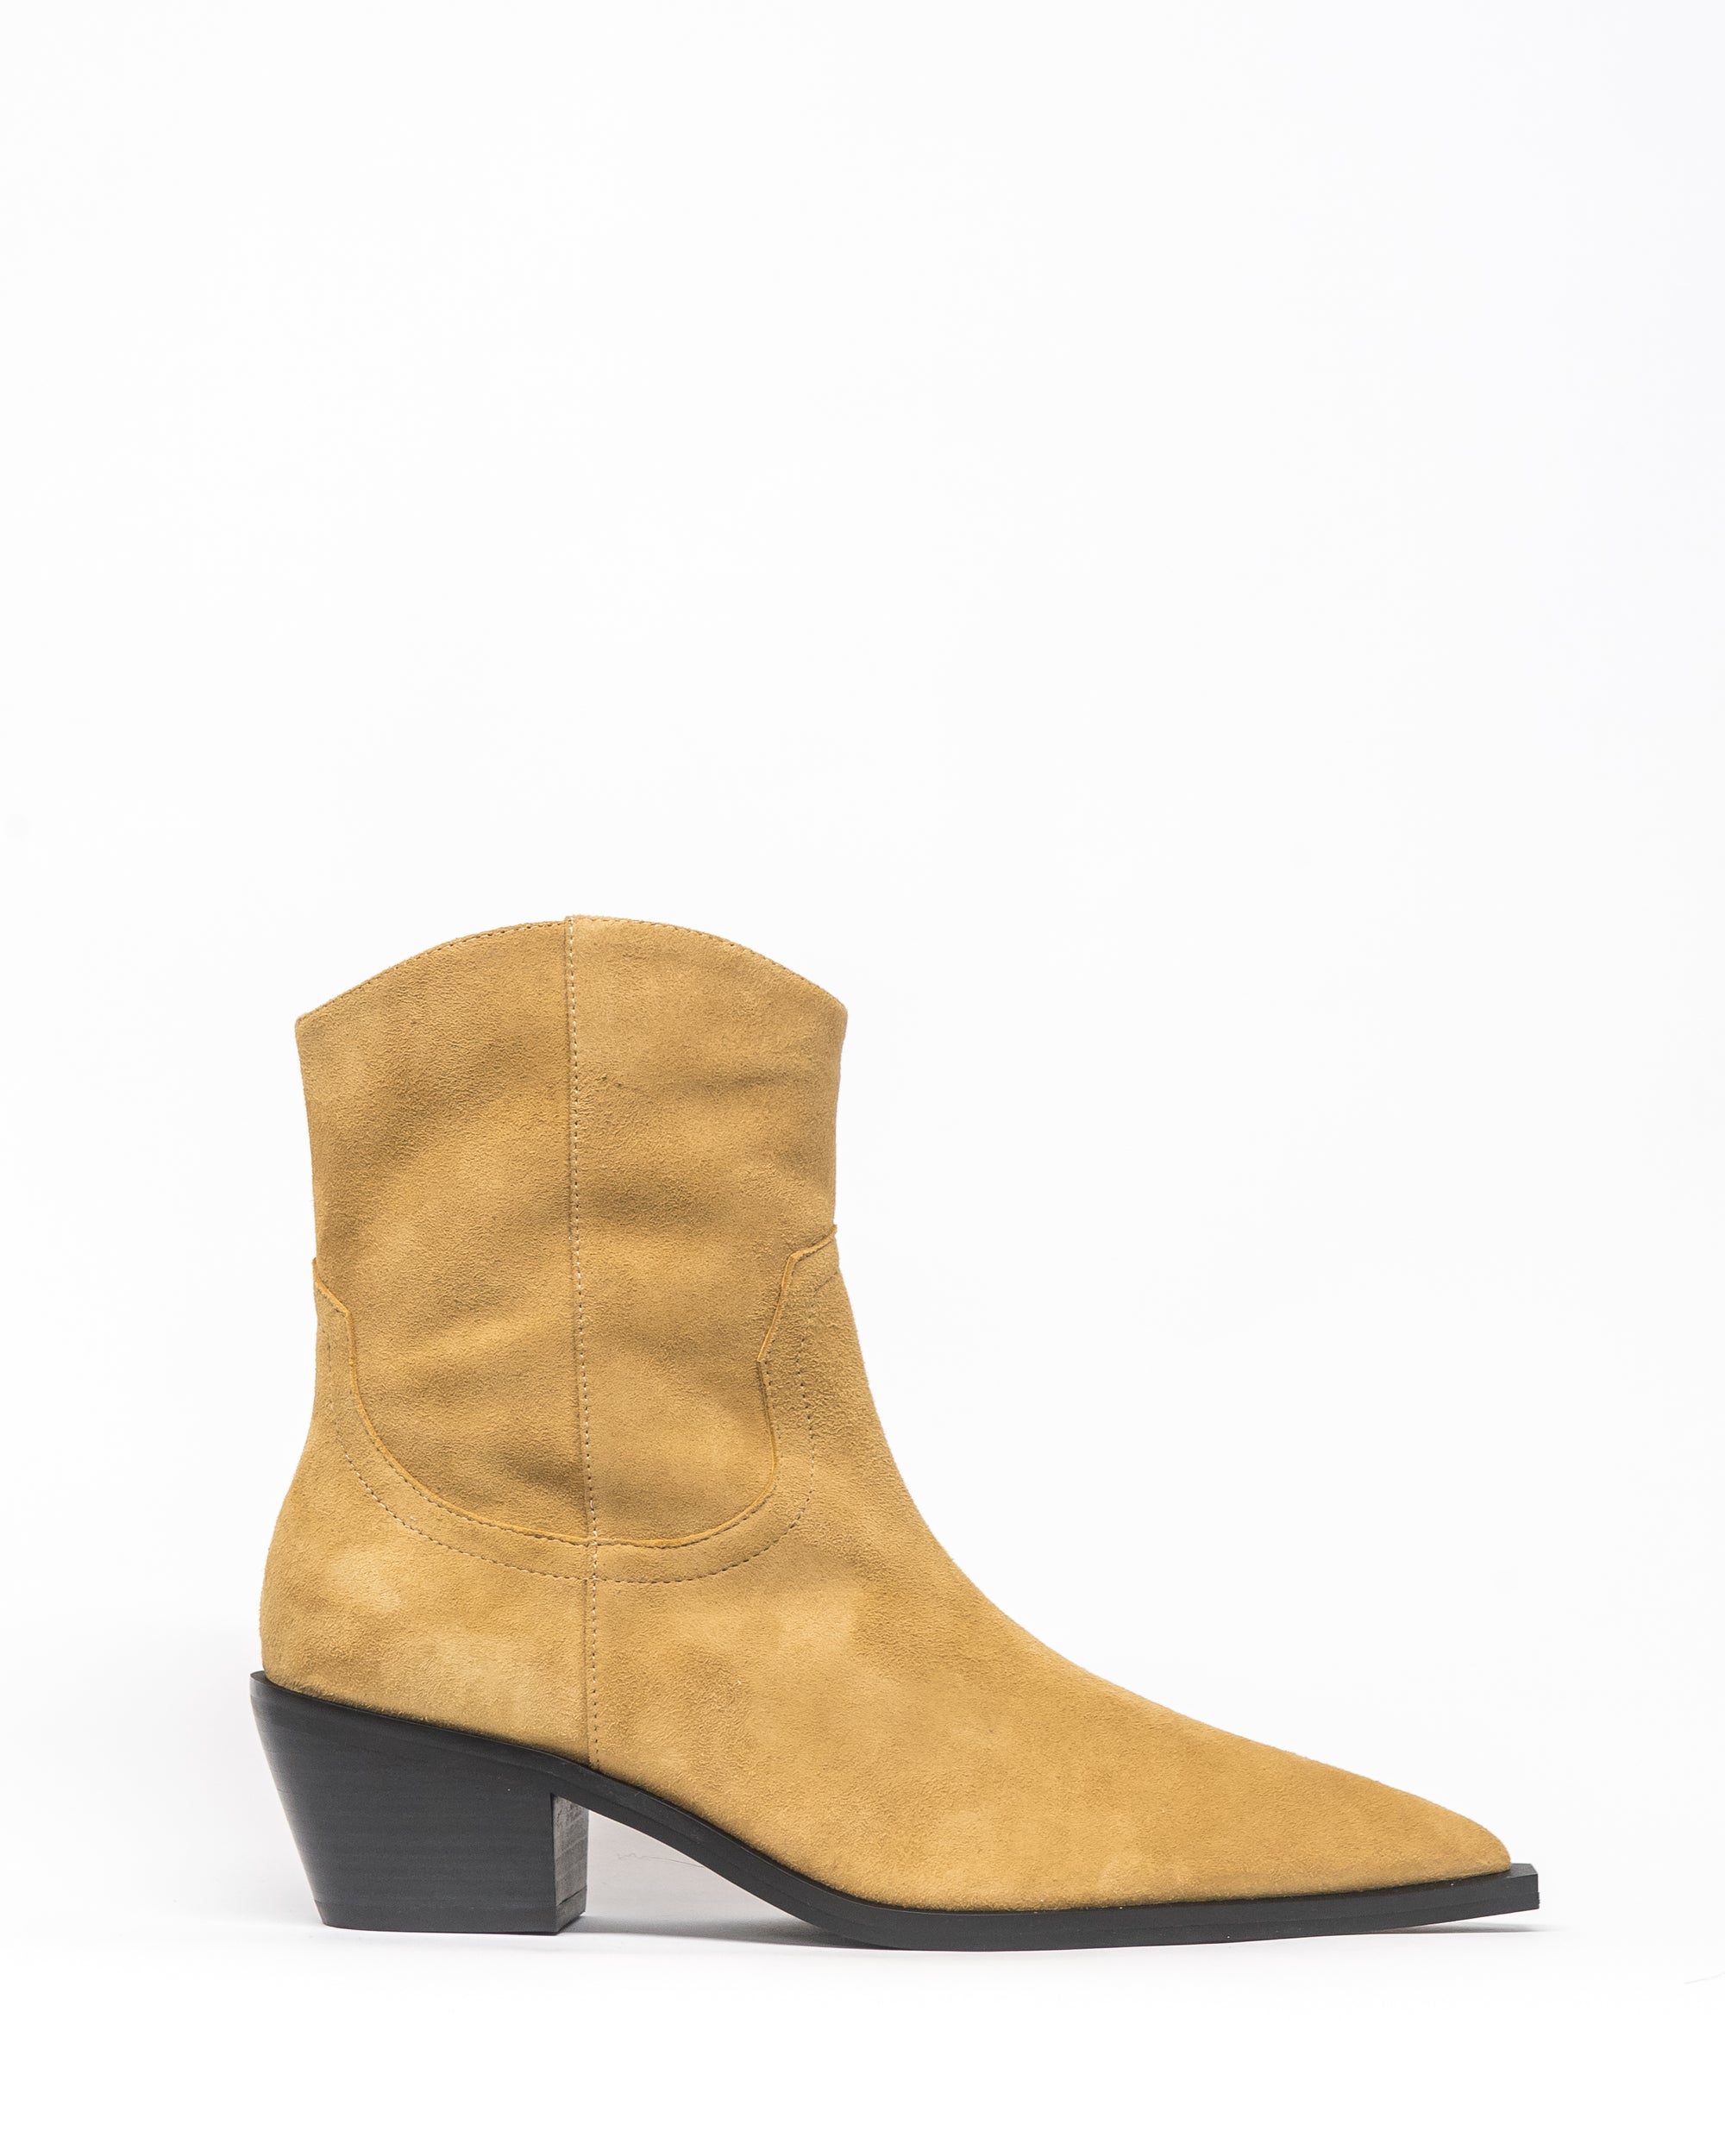 whip boot - taupe suede